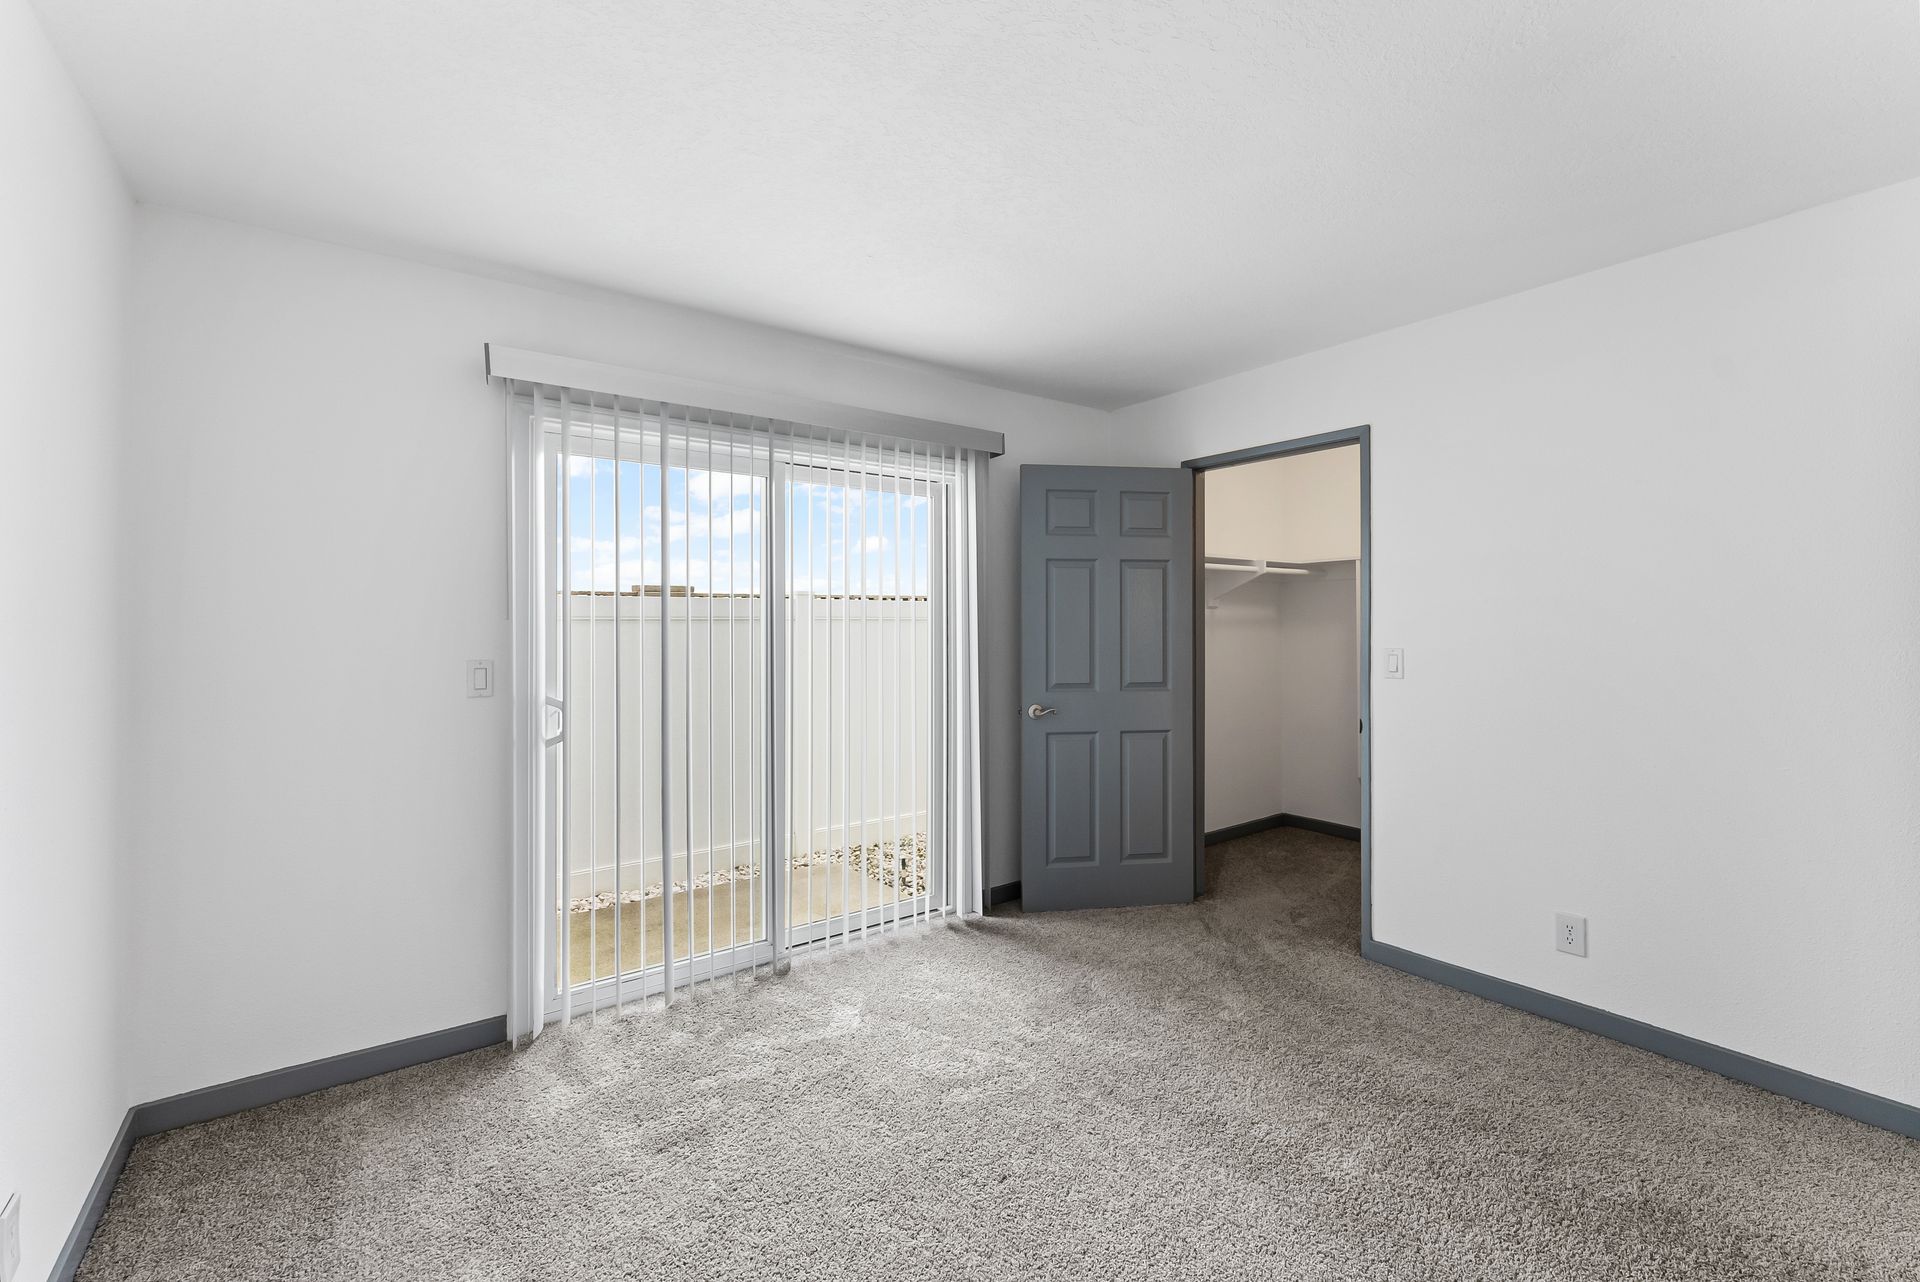 Sliding Photo Gallery Displaying Apartment Features- Bedroom with glass door to patio